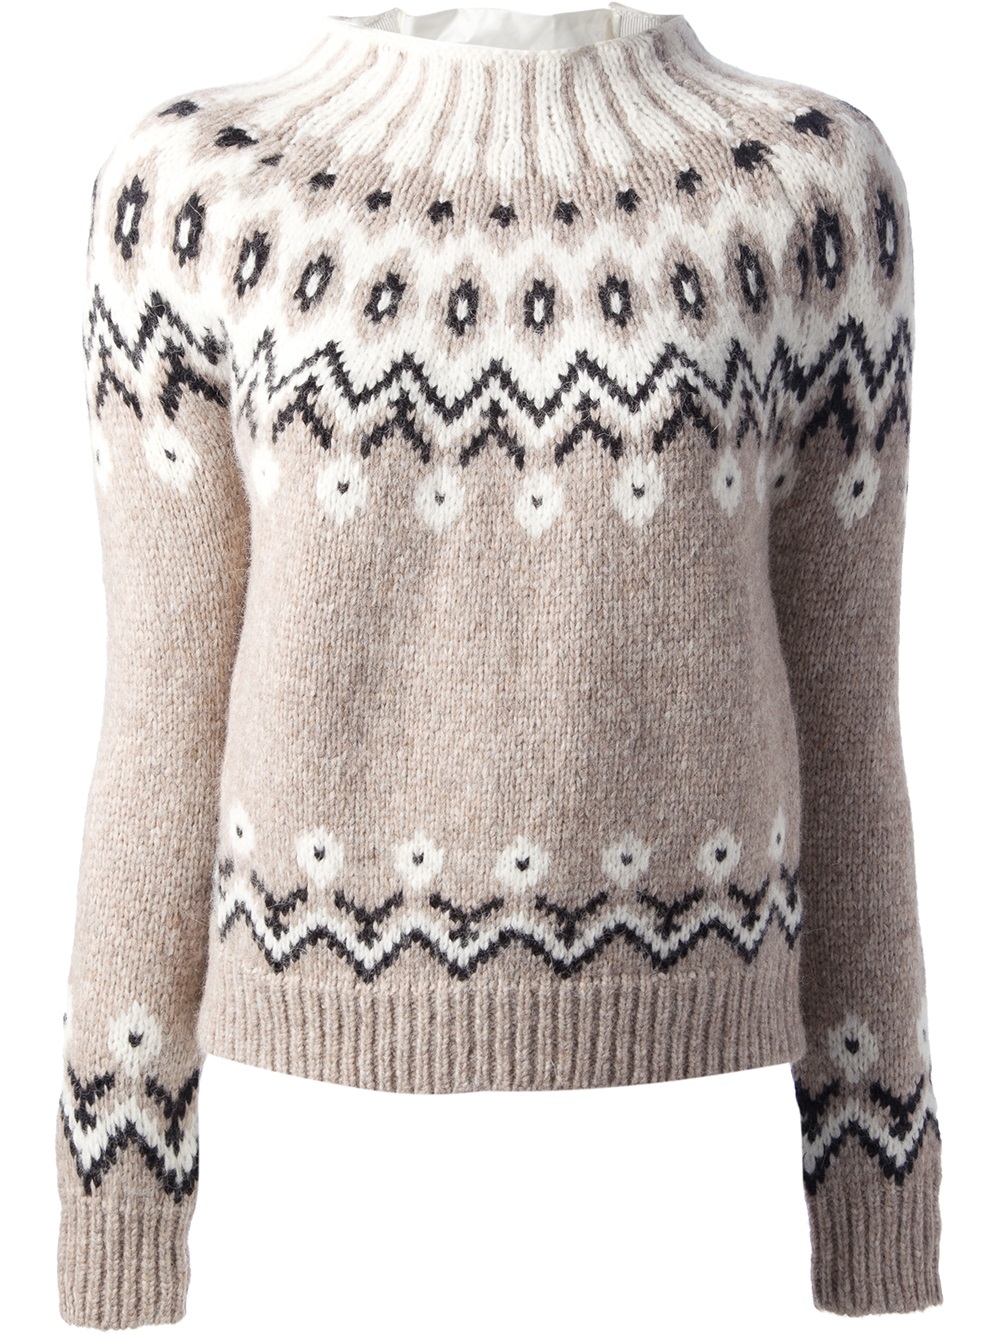 Moncler Fair Isle Knit Sweater in Natural - Lyst